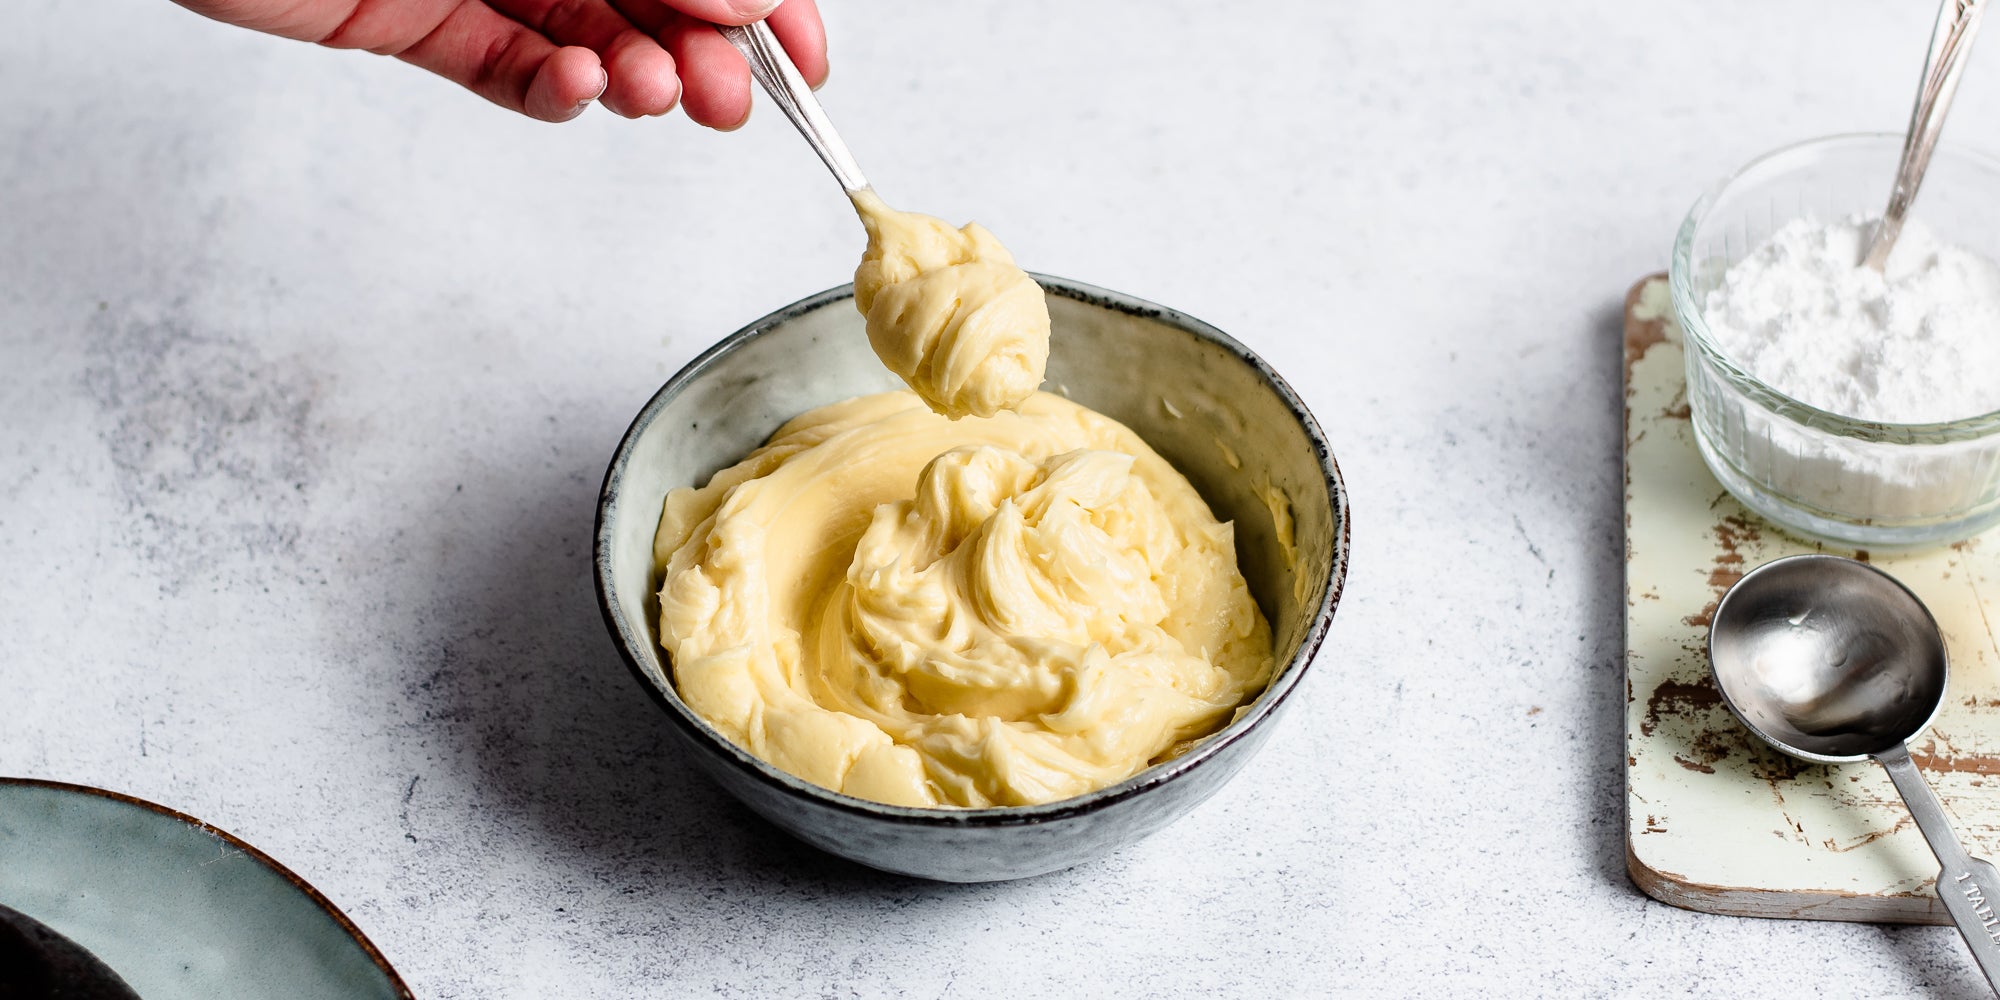 Bowl of Brandy Butter with a hand holding a spoon dipping in to take a dollop